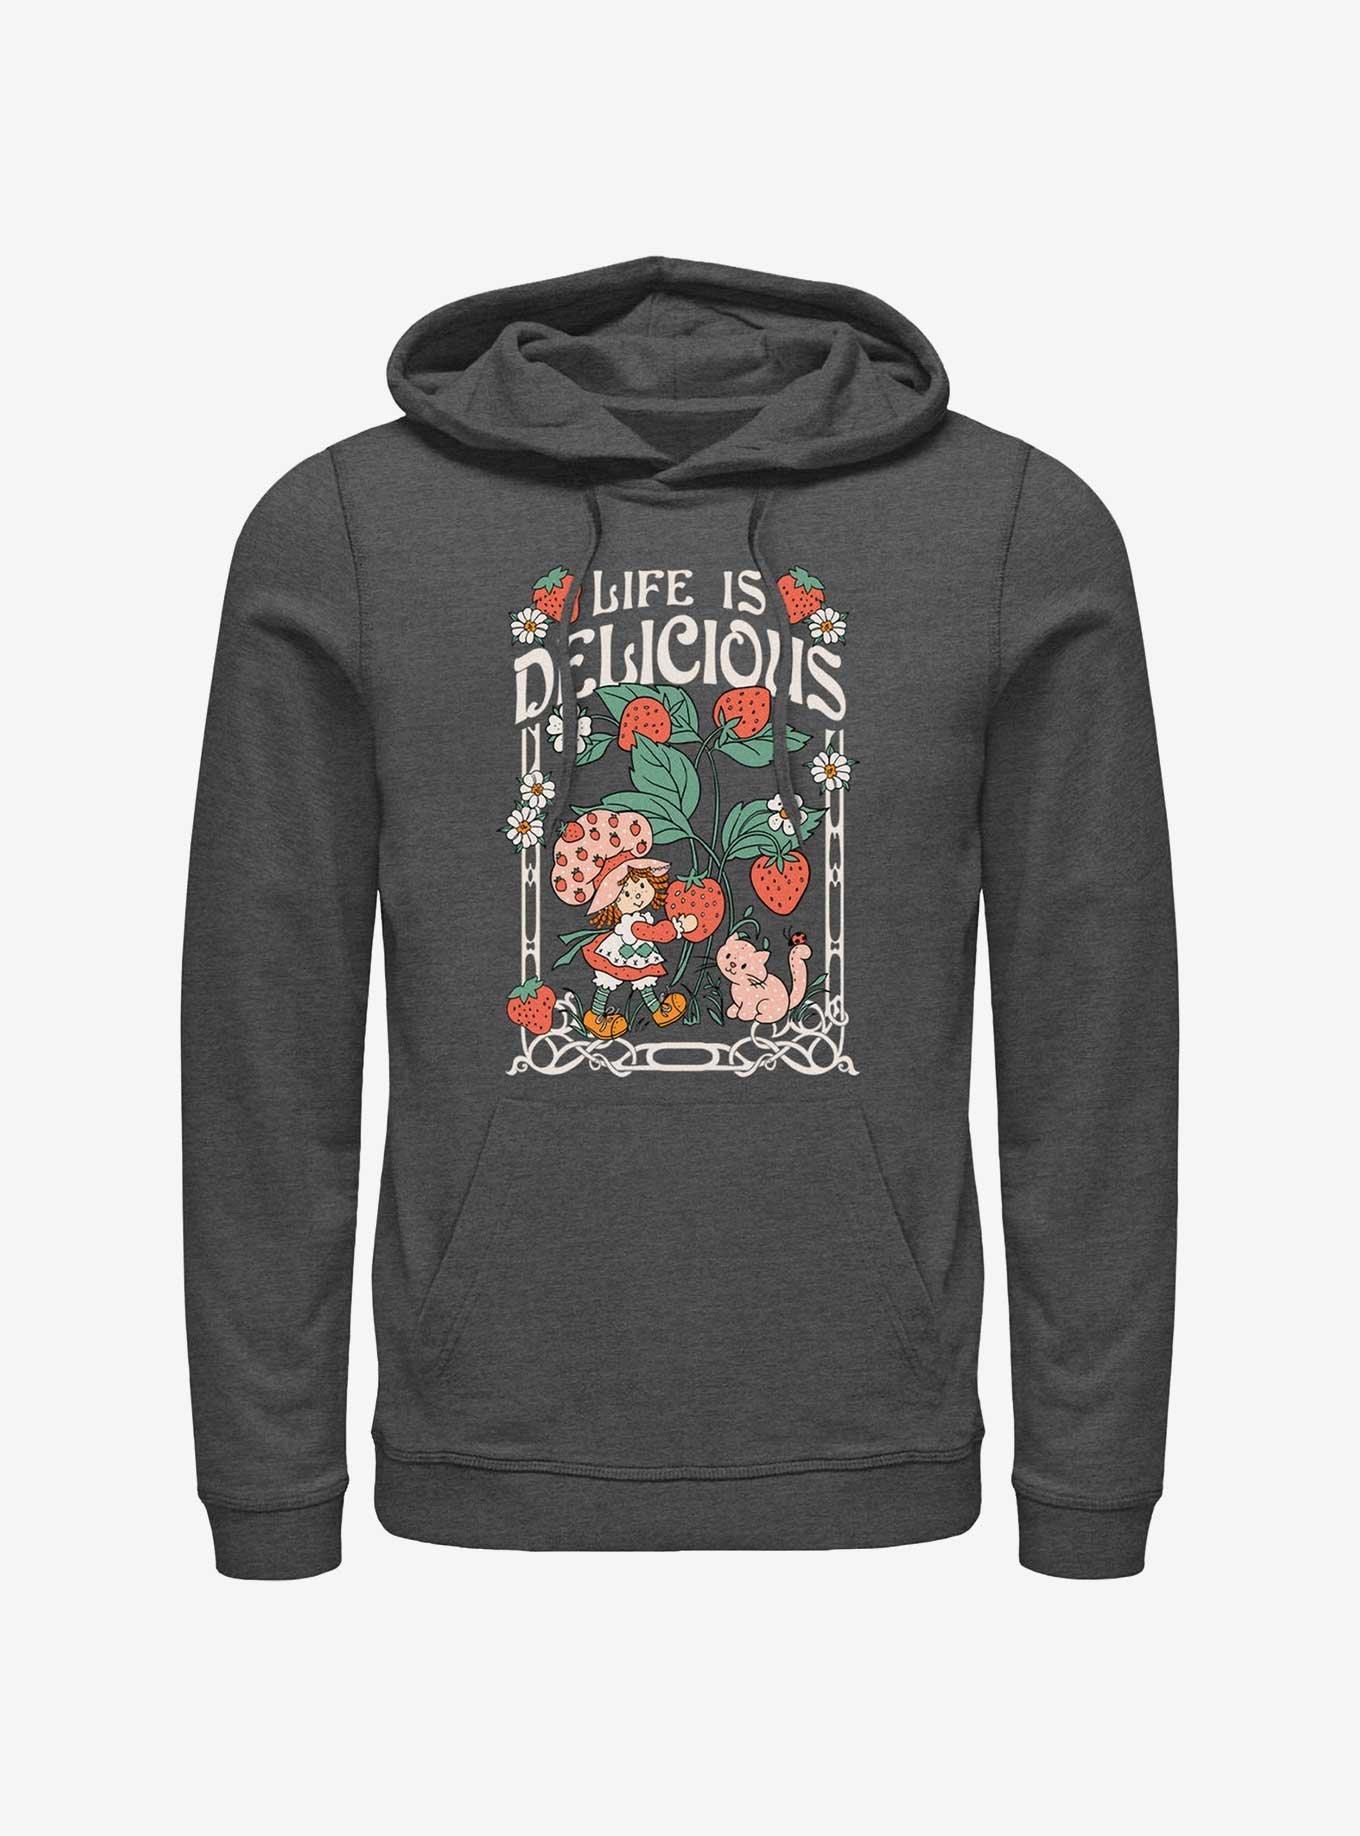 Strawberry Shortcake & Custard Life Is Delicious Hoodie, CHAR HTR, hi-res